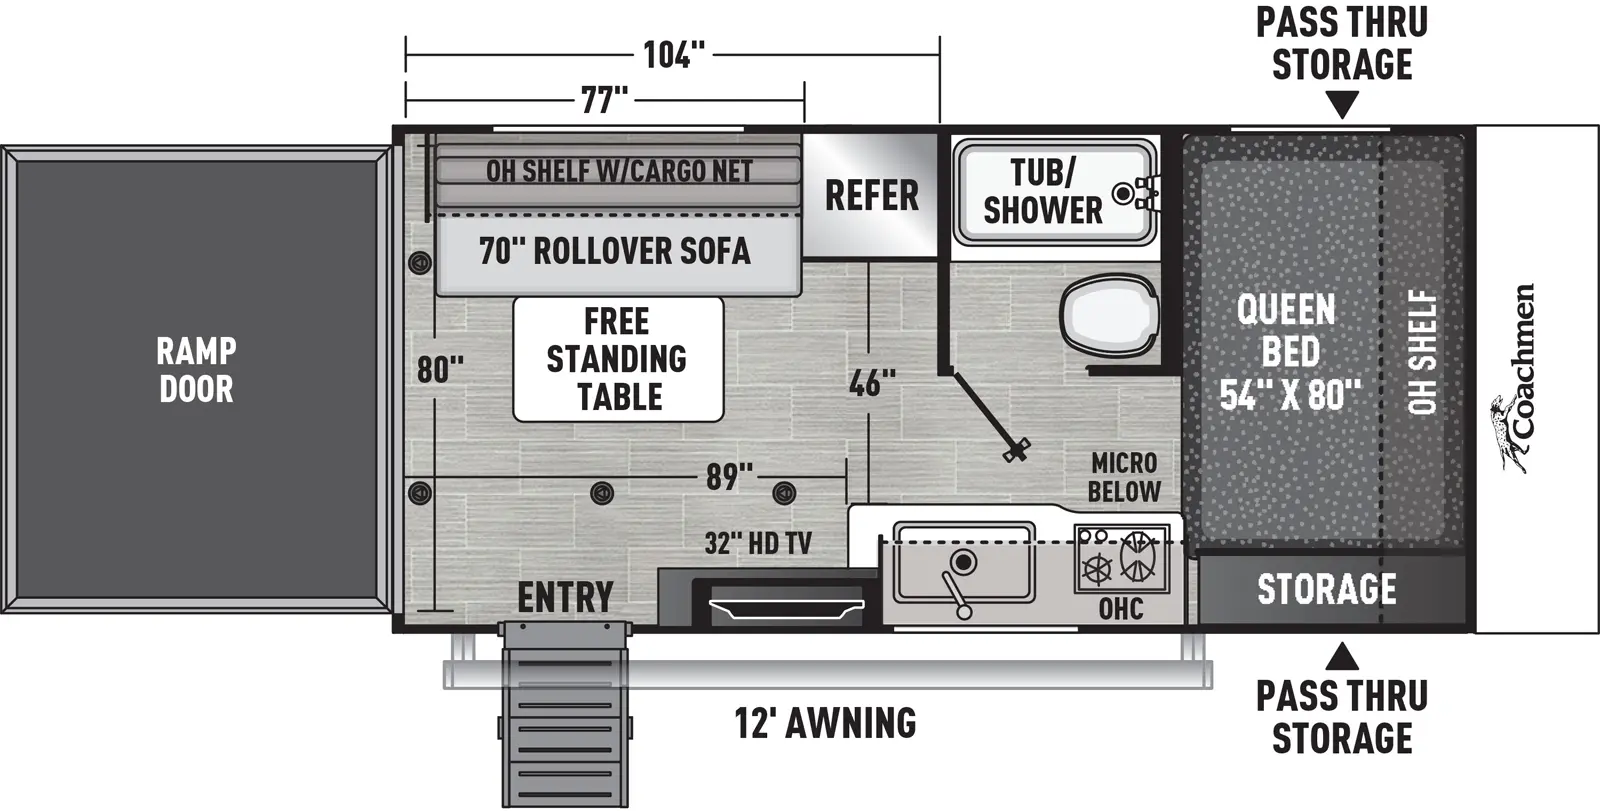 The 17BLSE has no slide outs, one entry, and a rear ramp door. Exterior features front pass-thru storage, and a 12 foot awning. Interior layout front to back: side facing queen bed with overhead shelf and door side storage; off-door side bathroom with toilet and tub/shower only; door side kitchen counter with cooktop and sink, microwave below, overhead cabinets with HD TV, and entry door off-door side refrigerator, rollover sofa with free-standing dinette and overhead shelf with cargo net. Garage dimensions: 104 inches from rear to bathroom wall; 89 inches from rear to kitchen counter; 77 inches from rear to refrigerator; 80 inches from door side to off-door side; 46 inches from kitchen counter to refrigerator.